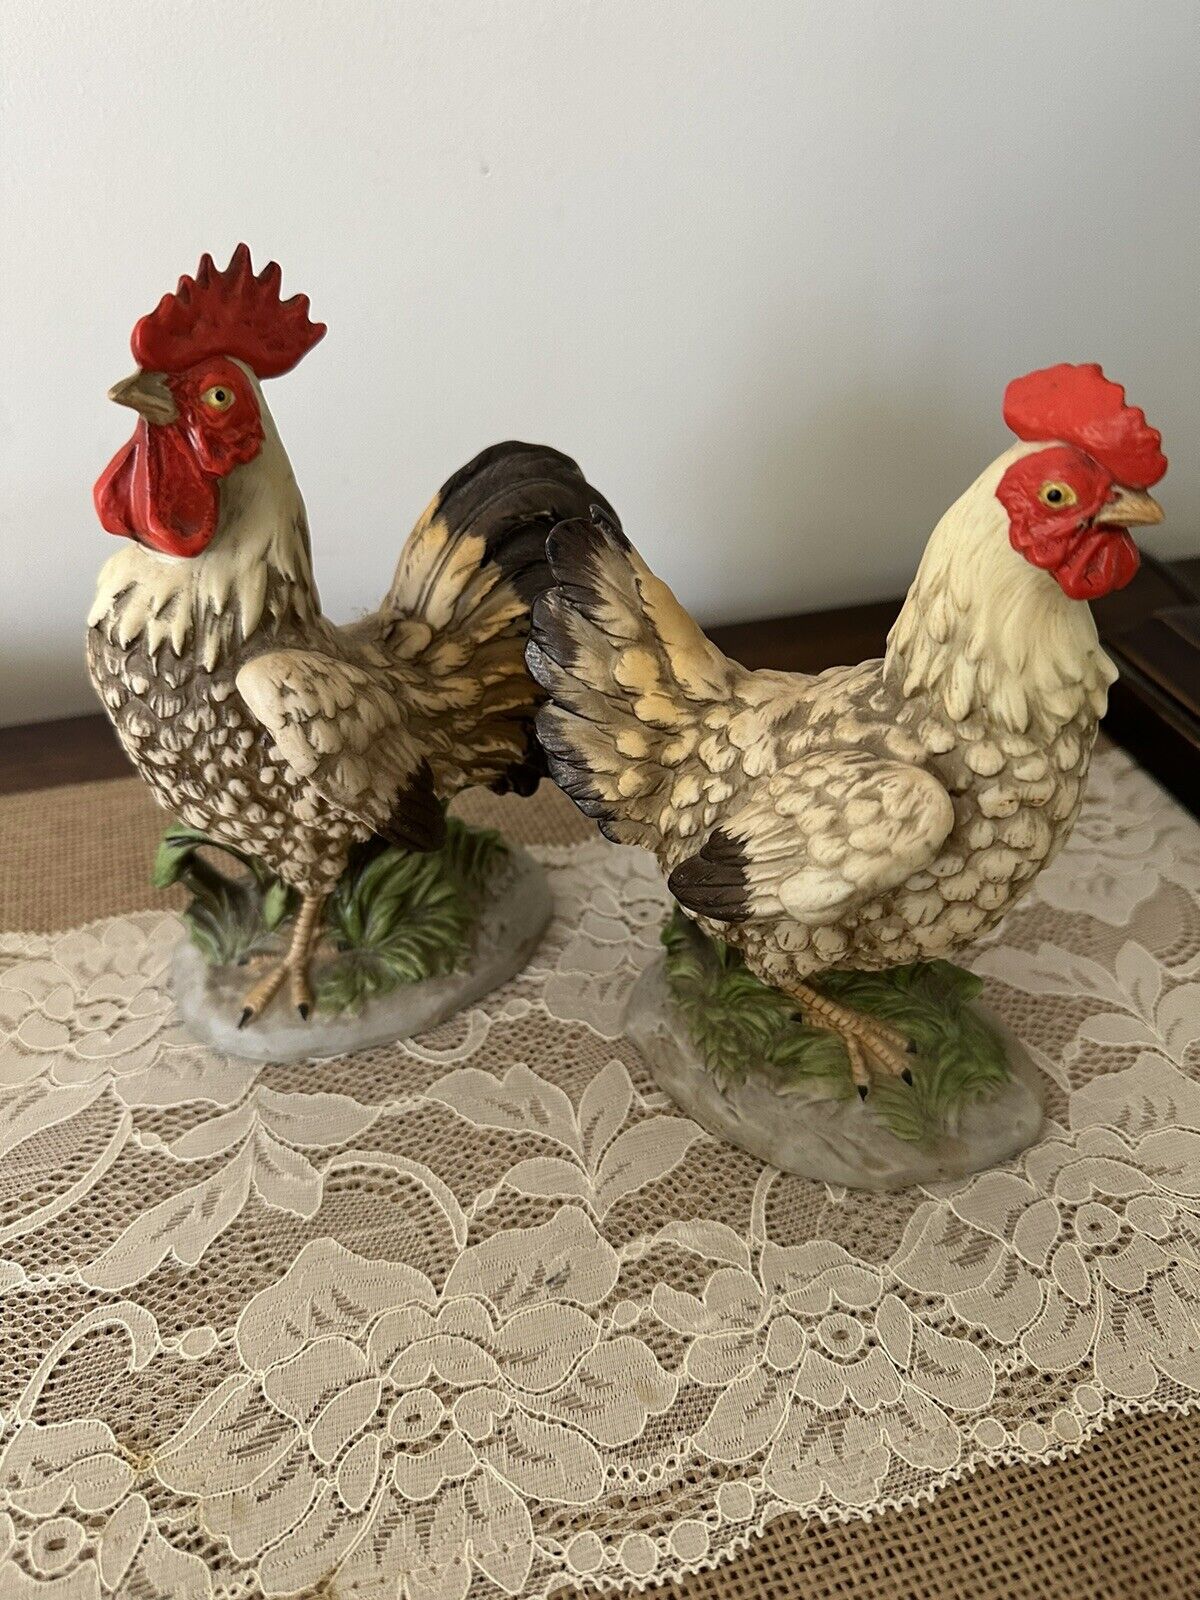 Vintage Collectibles Homco Ceramic Rooster and Hen Figurines #1446 Farmhouse